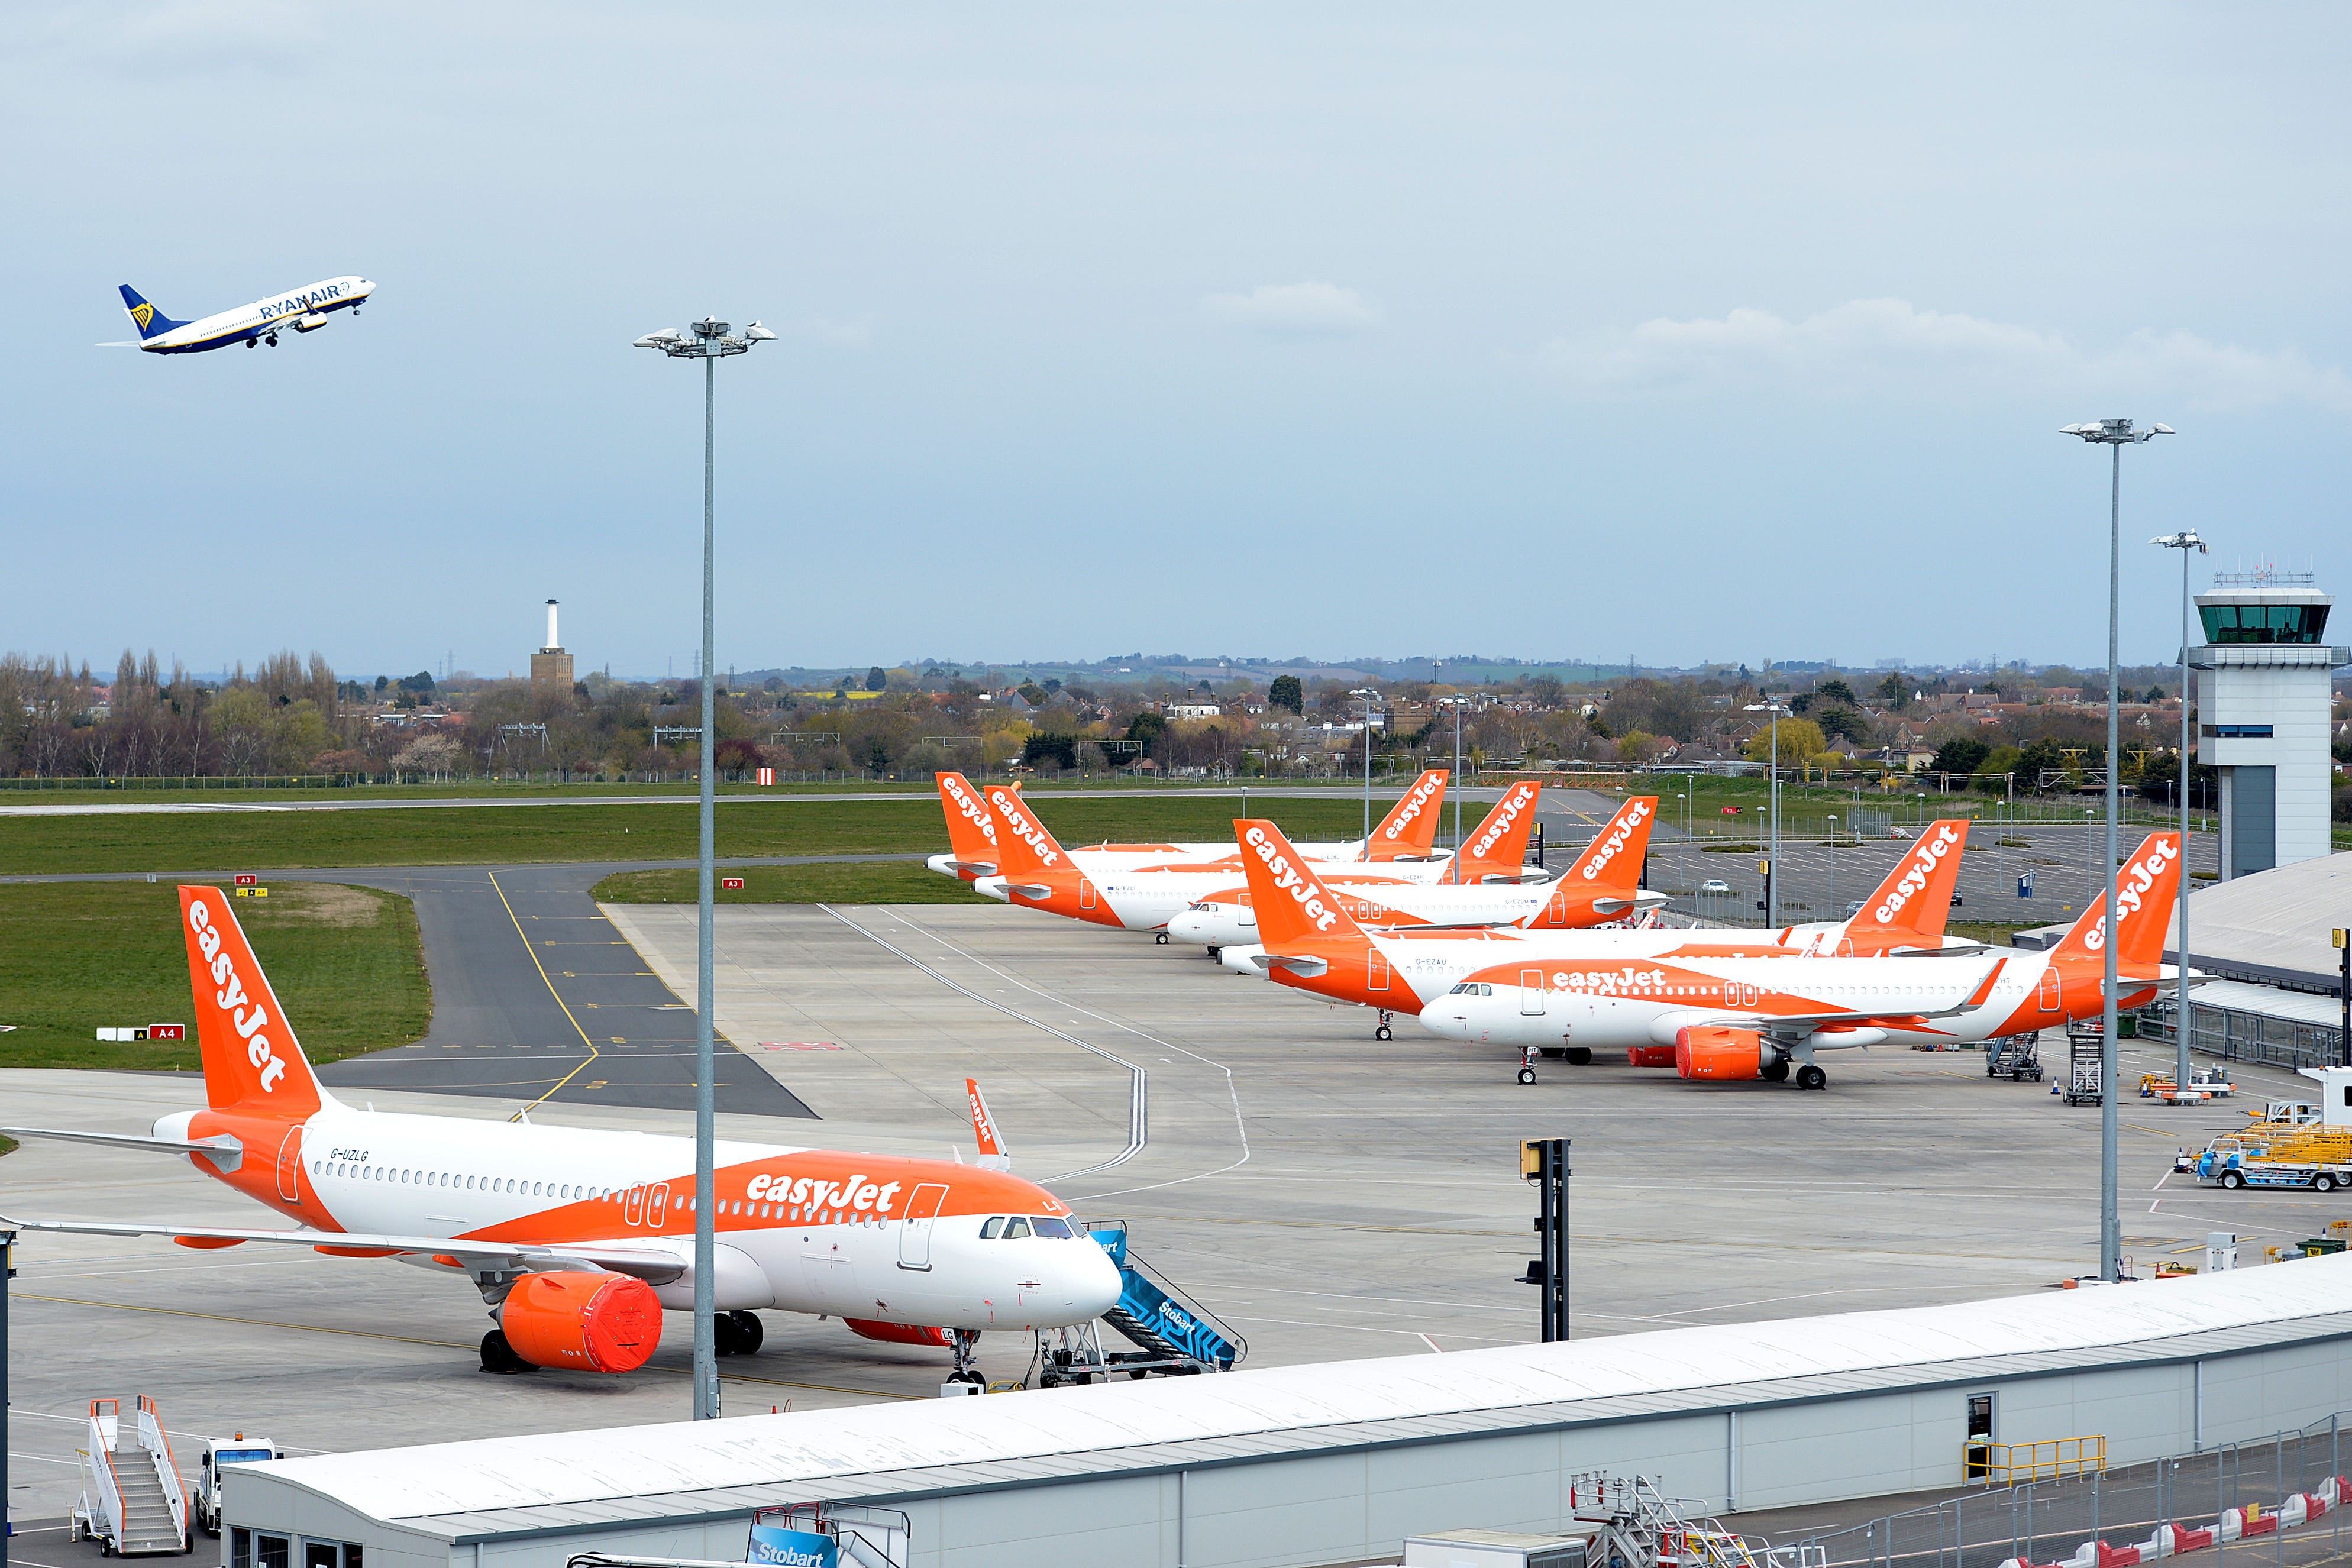 easyJet has announced changes to its holidays in a new sustainability initiative